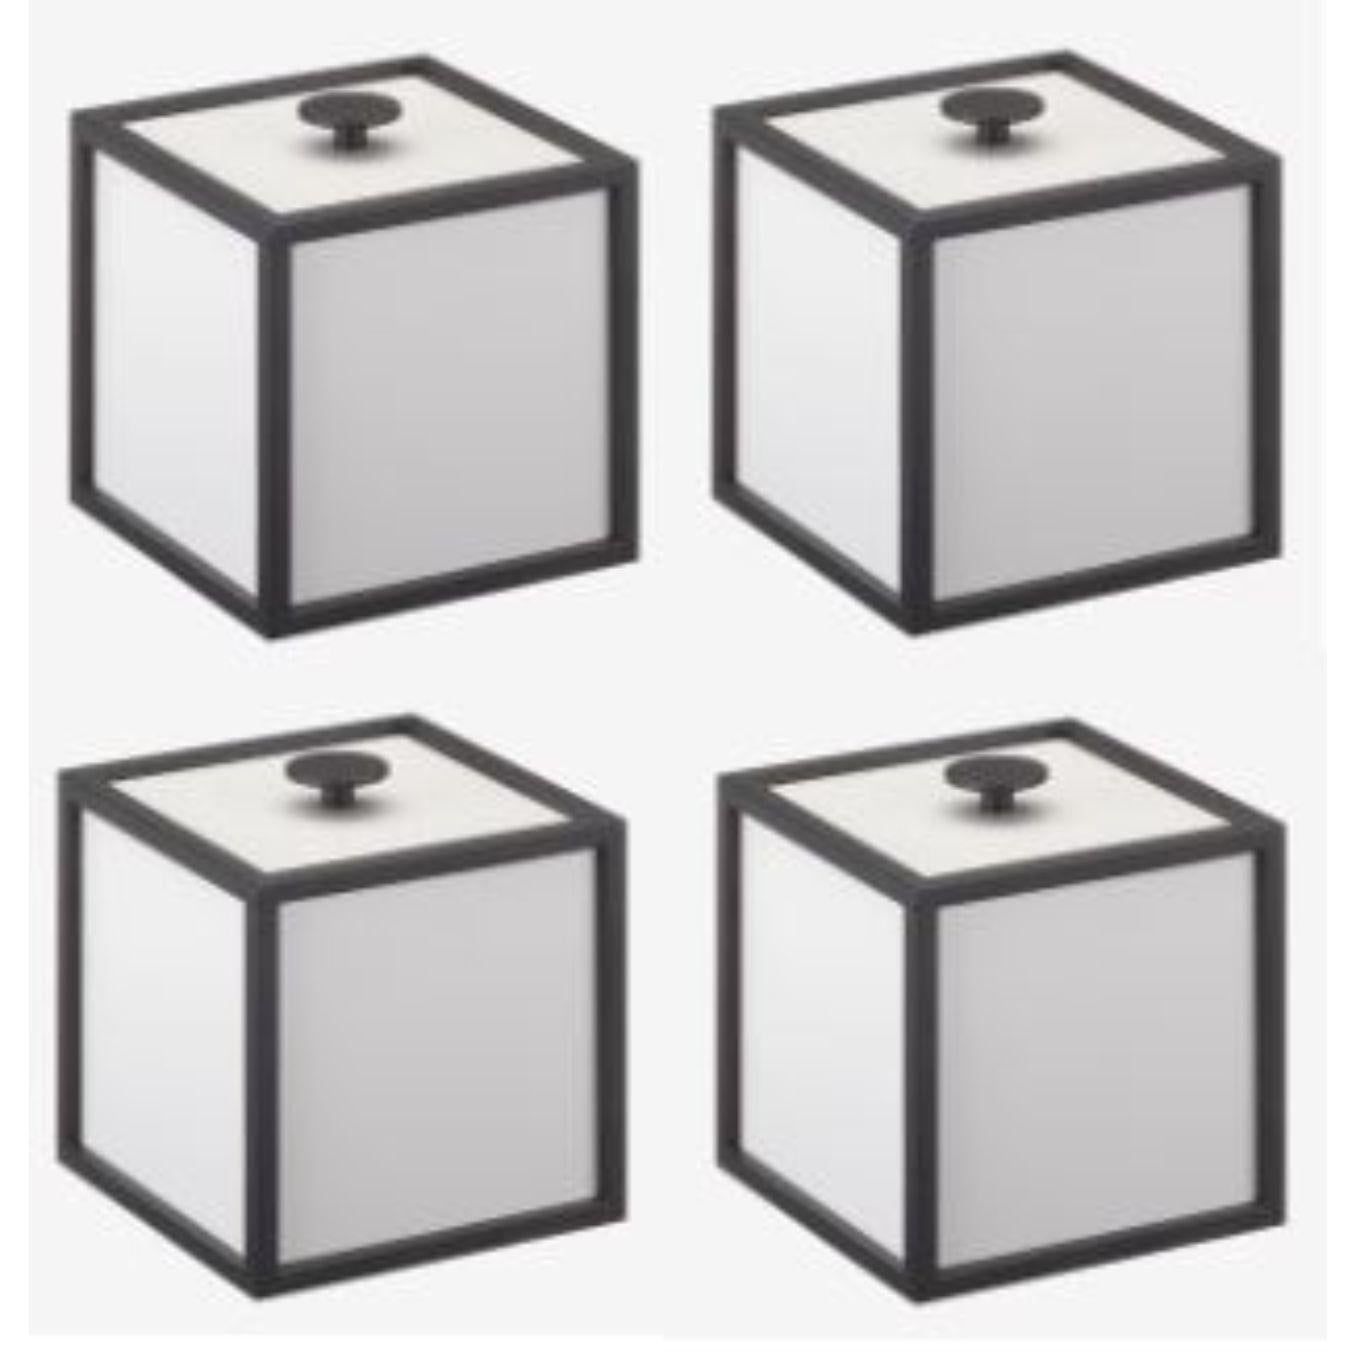 Set of 4 light grey frame 10 box by Lassen
Dimensions: d 10 x w 10 x h 10 cm 
Materials: Finér, Melamin, Melamine, Metal, Veneer
Weight: 0.85 Kg

Frame box is a square box in a cubistic shape. The simple boxes are inspired by the Kubus